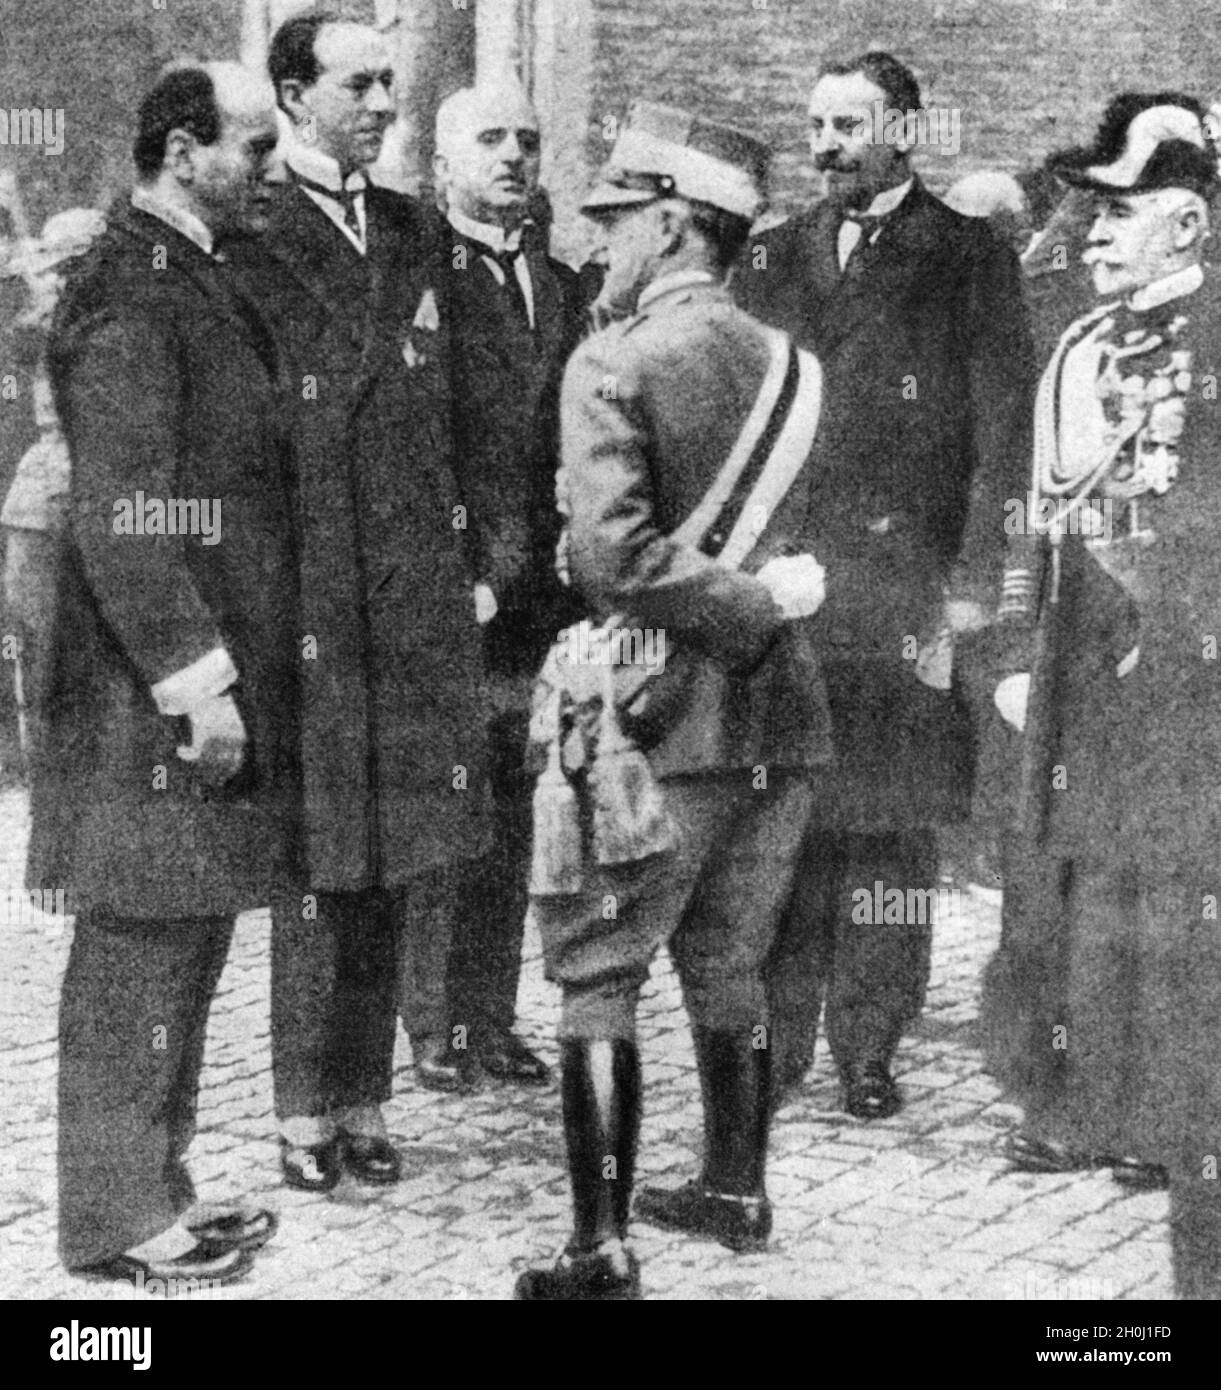 'The King of Italy, Victor Emmanuel III. (center), met publicly with Benito Mussolini on November 4, 1922. The King had appointed him as the new Prime Minister at the end of October, after the latter had previously threatened a coup d'état through his ''March on Rome''. Next to them are some ministers of the new government: Aldo Finzi (Secretary of State for the Interior, left), probably Gabriello Carnazza (Minister of Public Works, right) and Grand Admiral Paolo Thaon di Revel (Minister of the Navy, far right). [automated translation]' Stock Photo